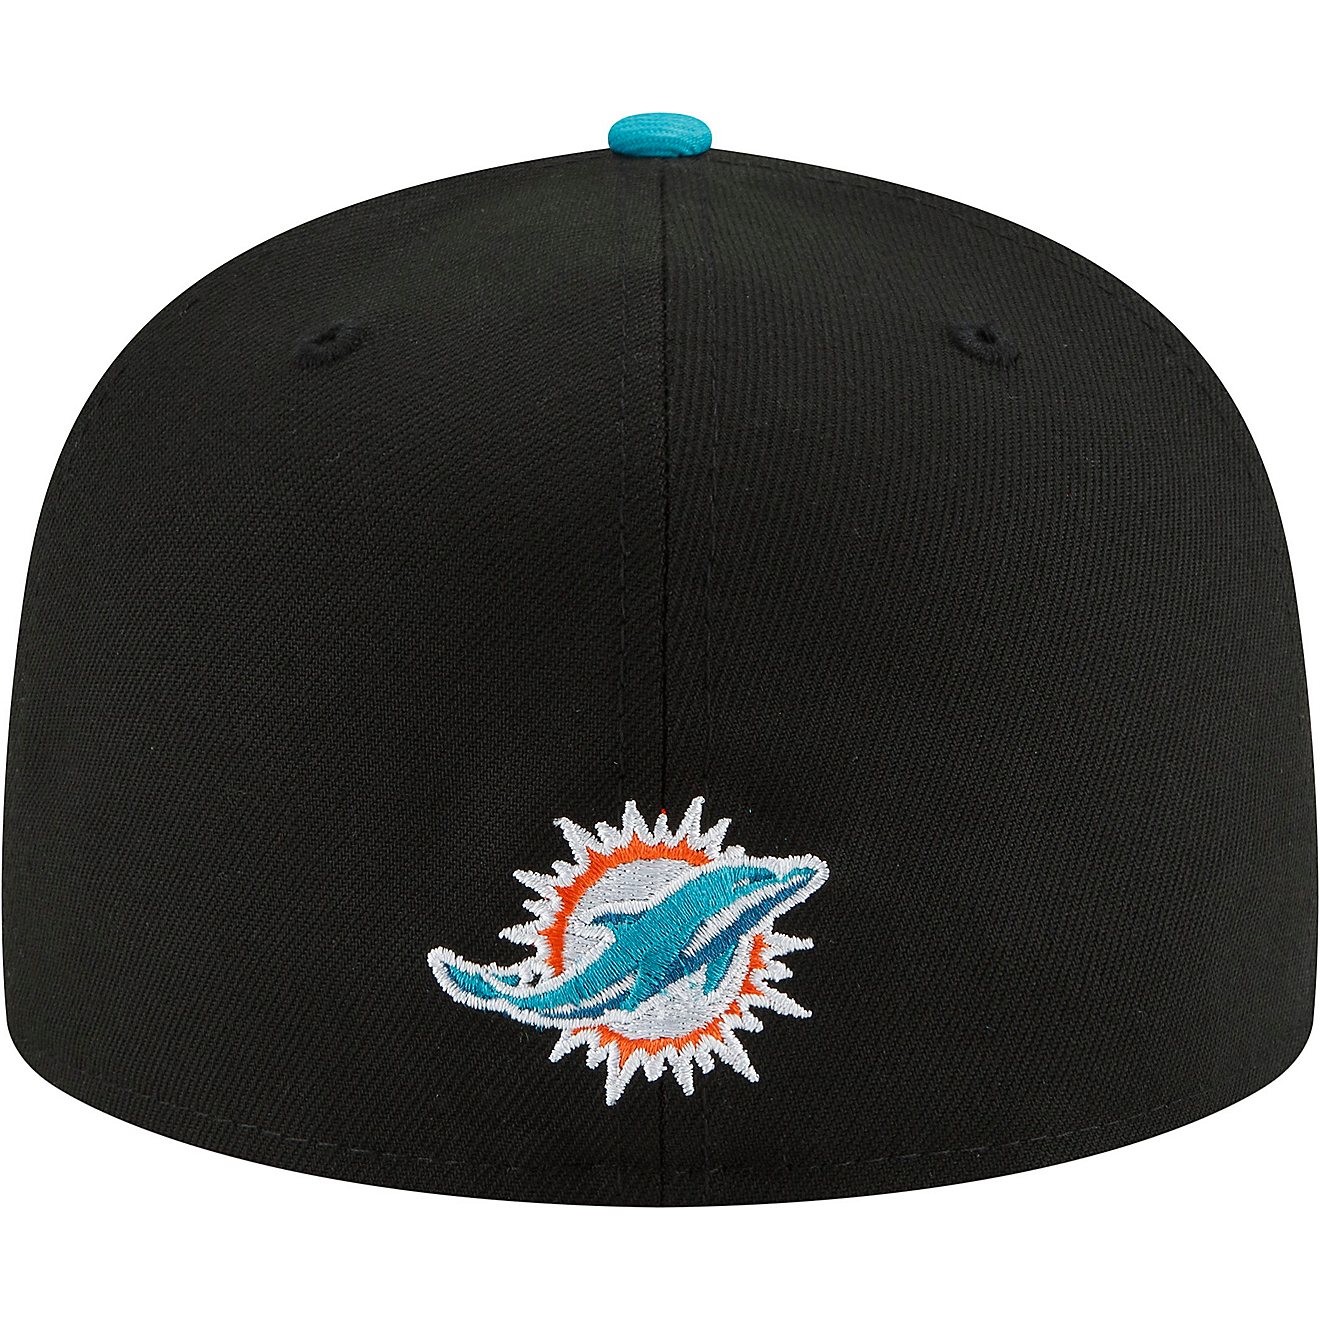 New Era Men's Miami Dolphins NFL Draft 22 59FIFTY Cap                                                                            - view number 4